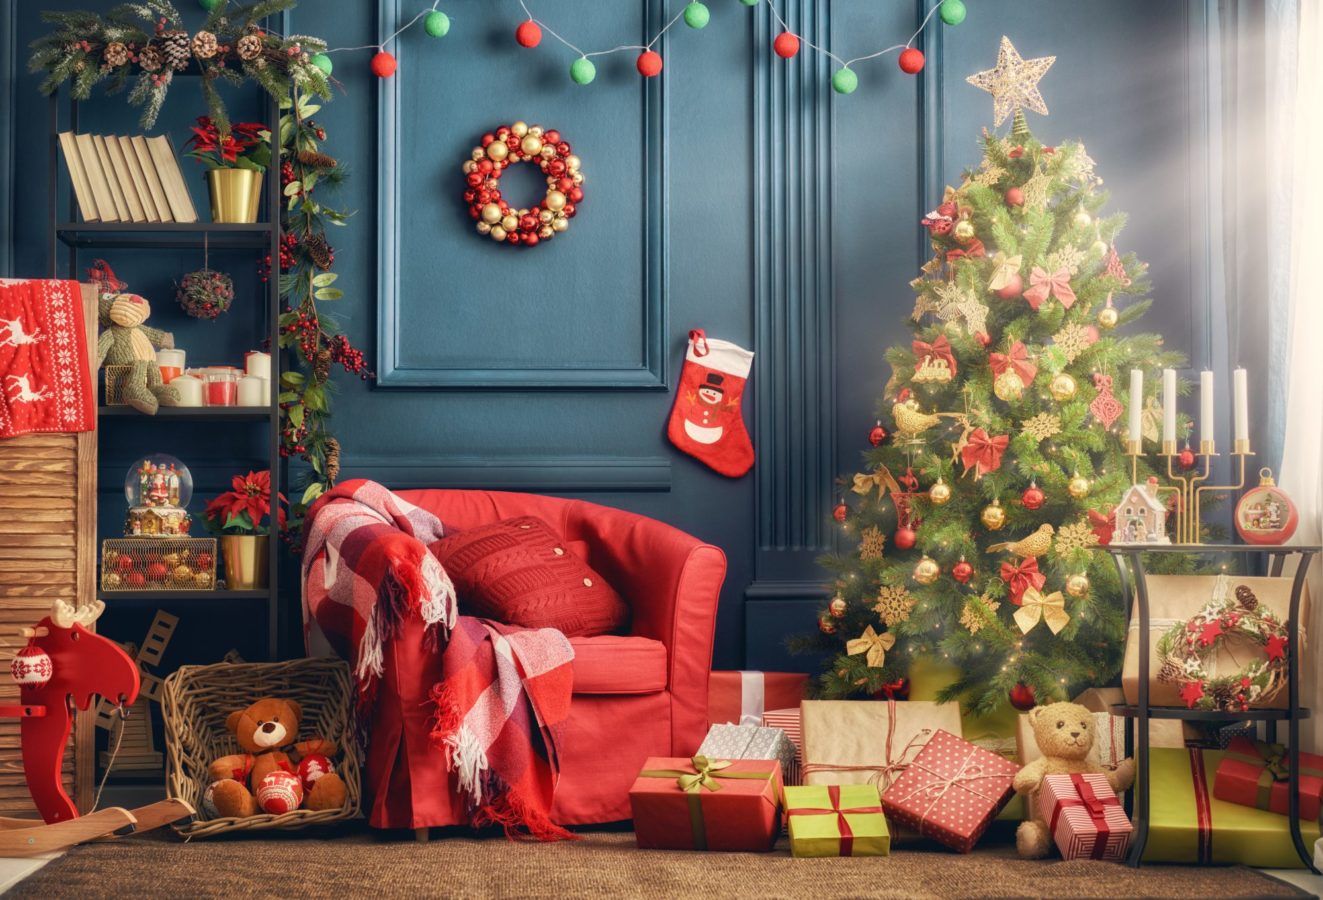 The best colour palettes and textures for holiday decorating